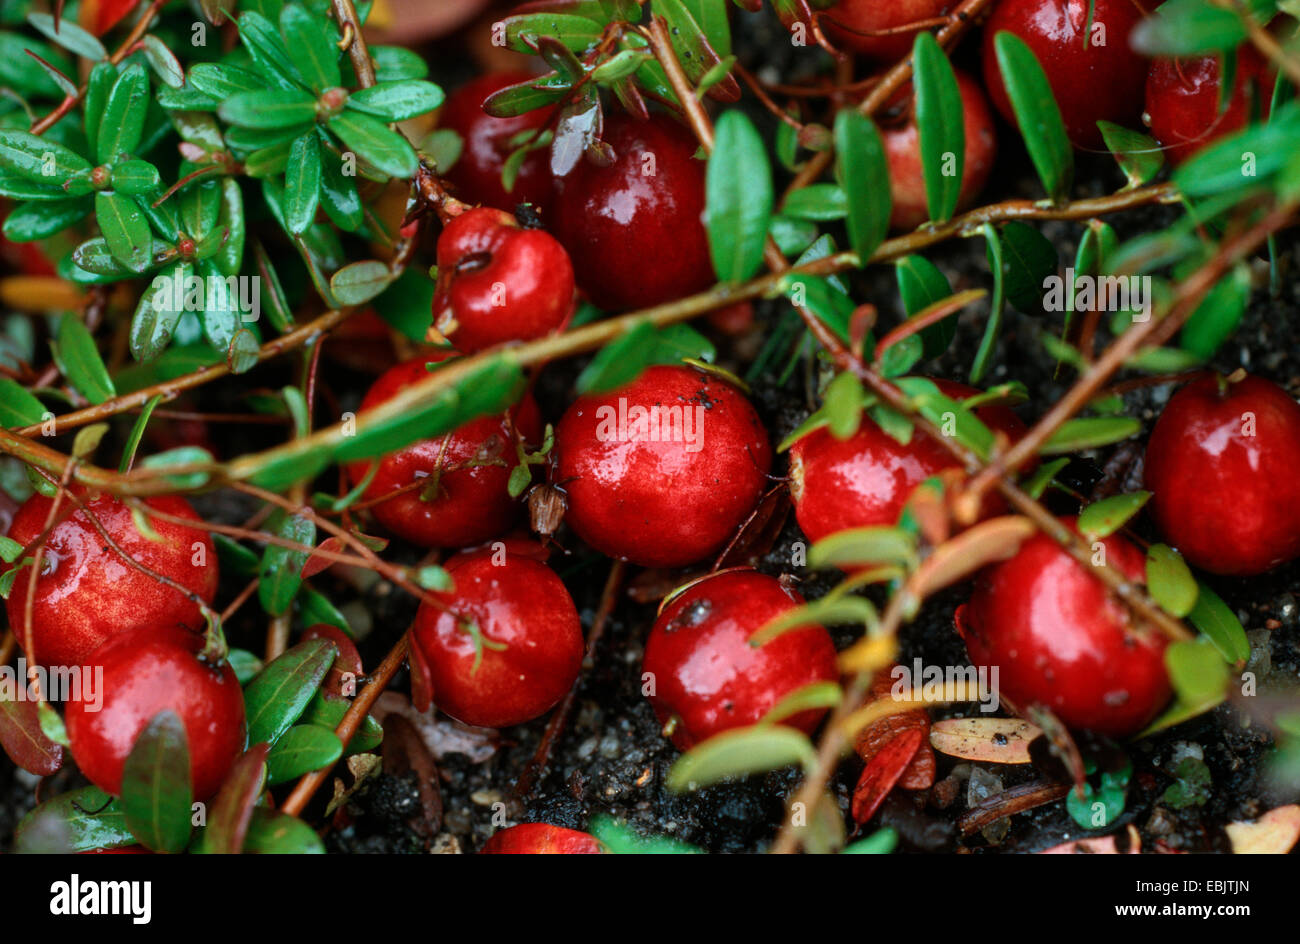 American cranberry, cultivated cranberry, large cranberry (Vaccinium macrocarpon), with fruits Stock Photo